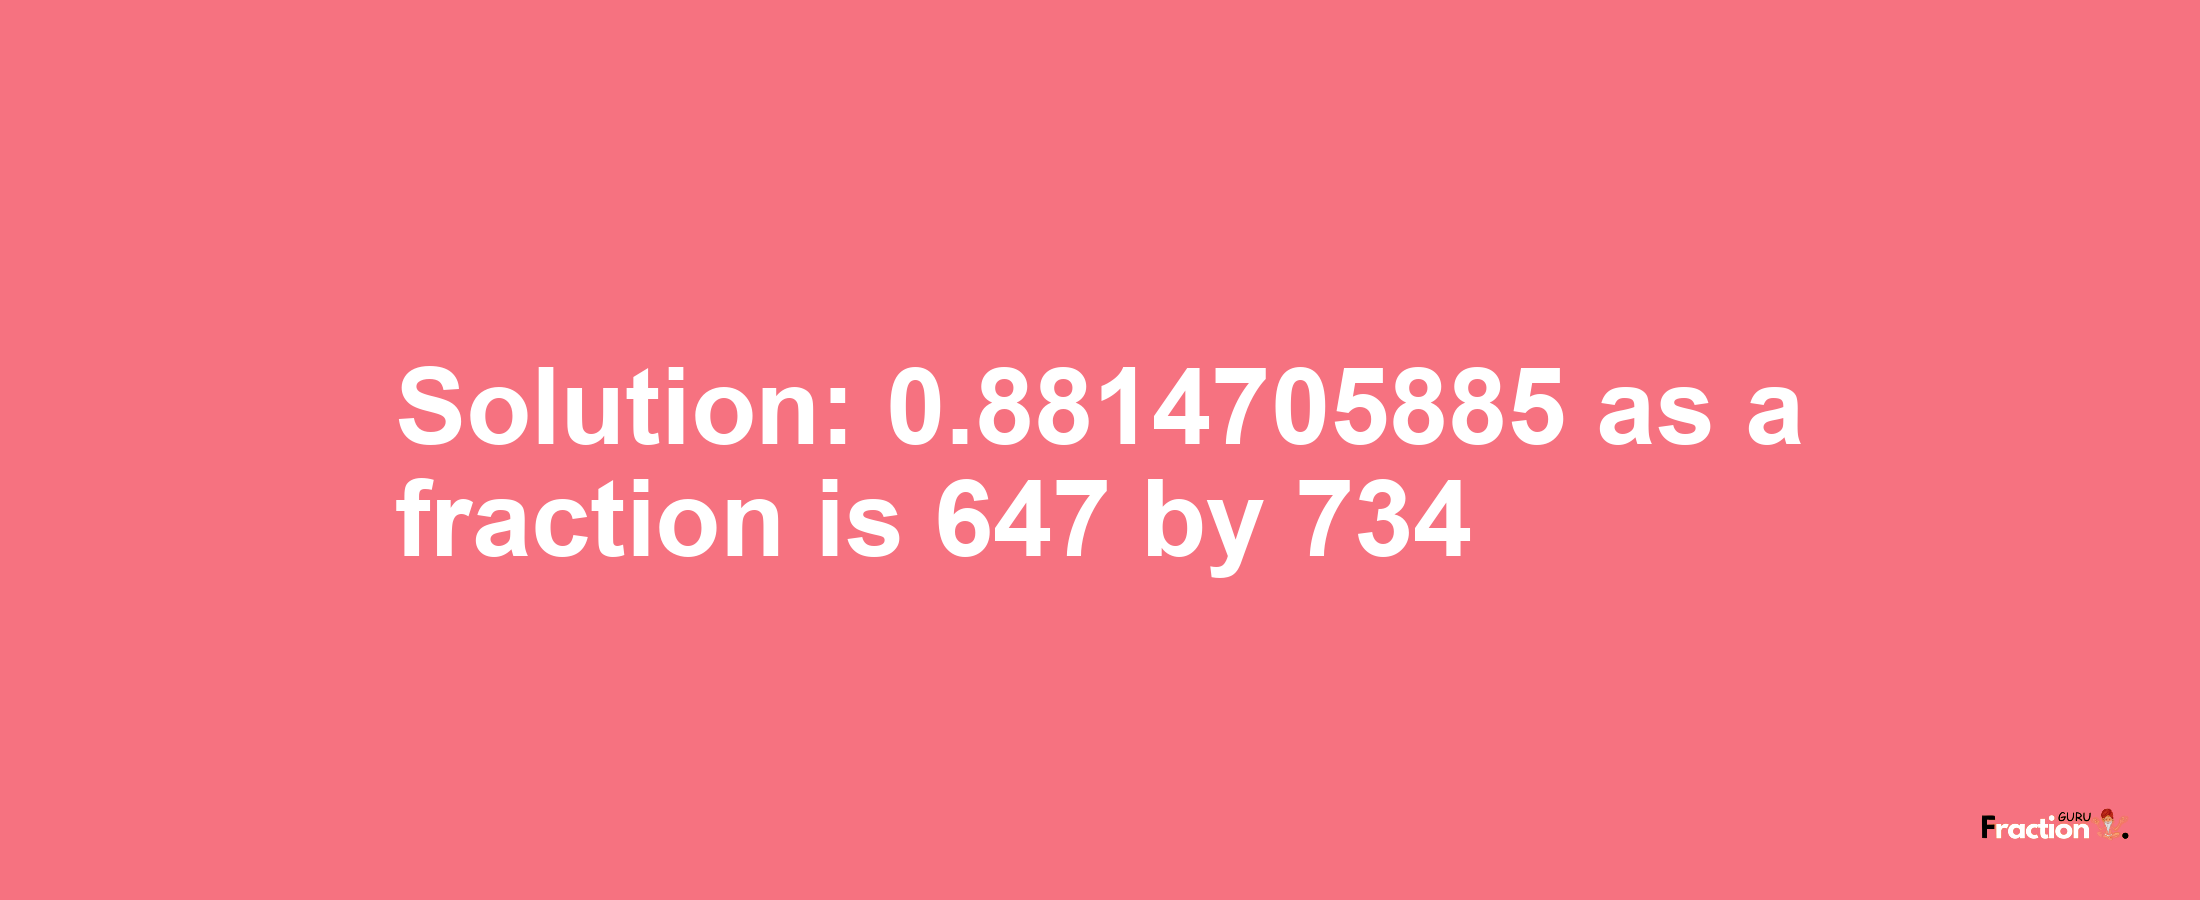 Solution:0.8814705885 as a fraction is 647/734